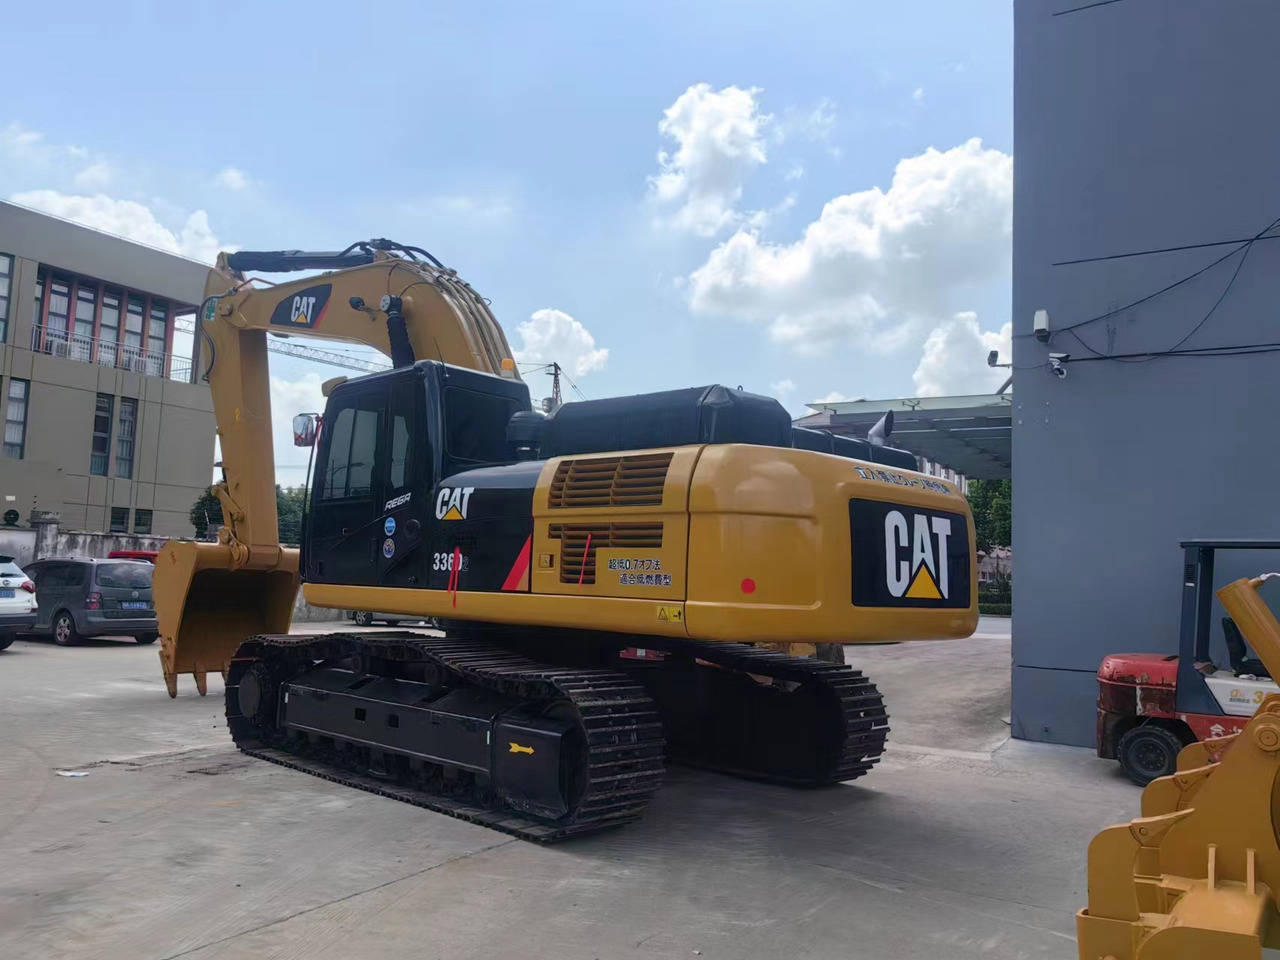 Crawler excavator 95%new Original Japan made CATERPILLAR Cat 336D2, Large engineering construction machinery good condition in stock hot selling !!!: picture 3